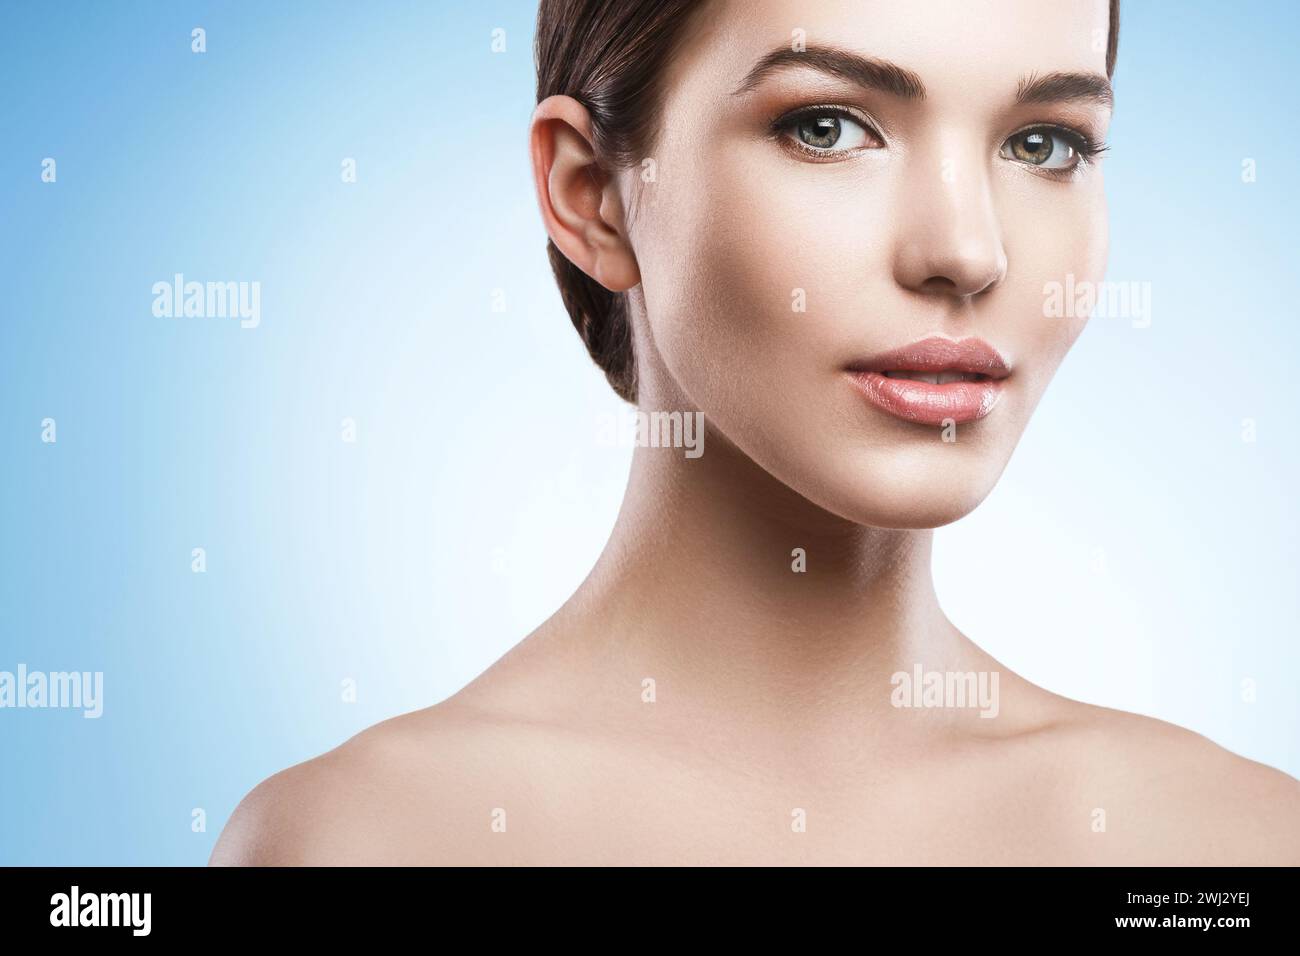 Young woman with natural makeup and smooth skin against light blue background Stock Photo